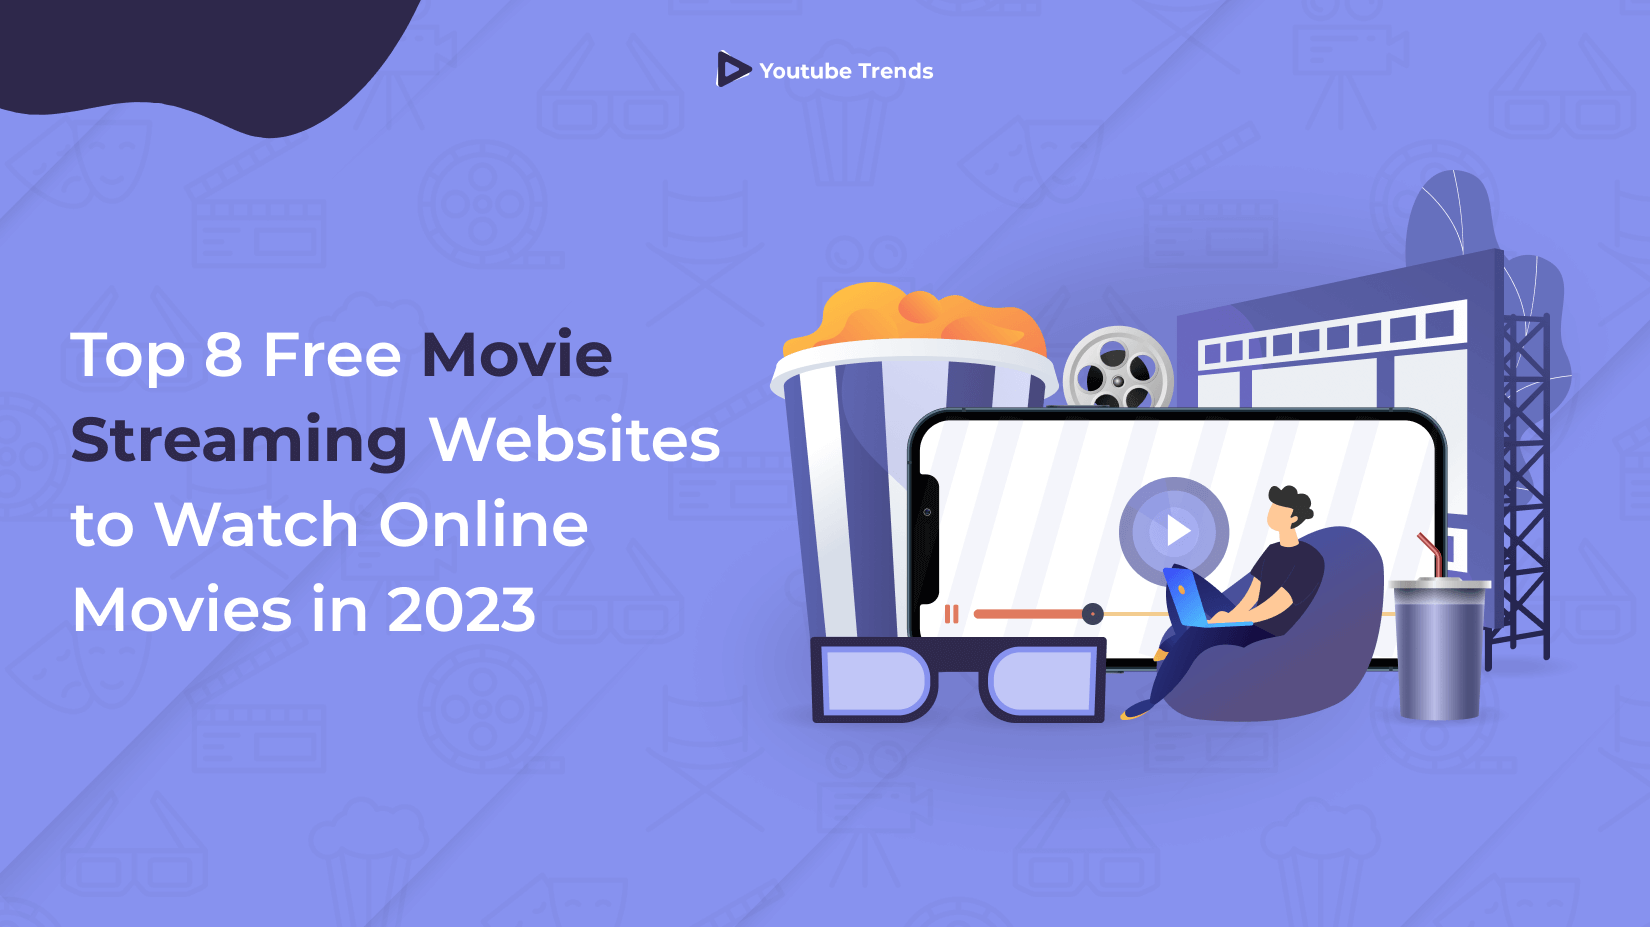 Top 8 Free Movie Streaming Websites to Watch Online Movies in 2023